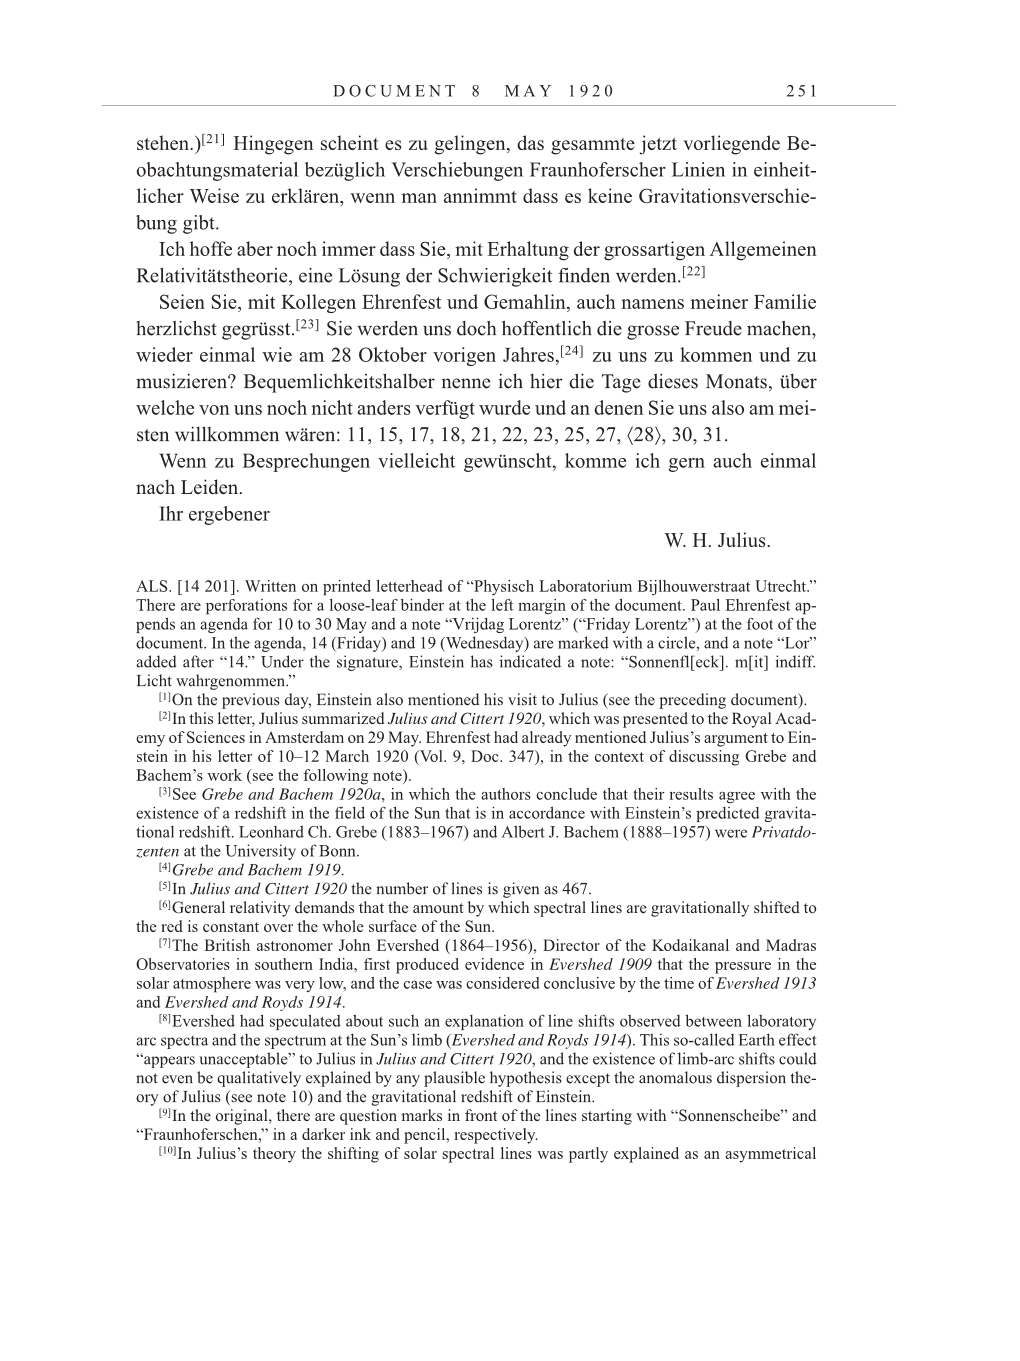 Volume 10: The Berlin Years: Correspondence May-December 1920 / Supplementary Correspondence 1909-1920 page 251